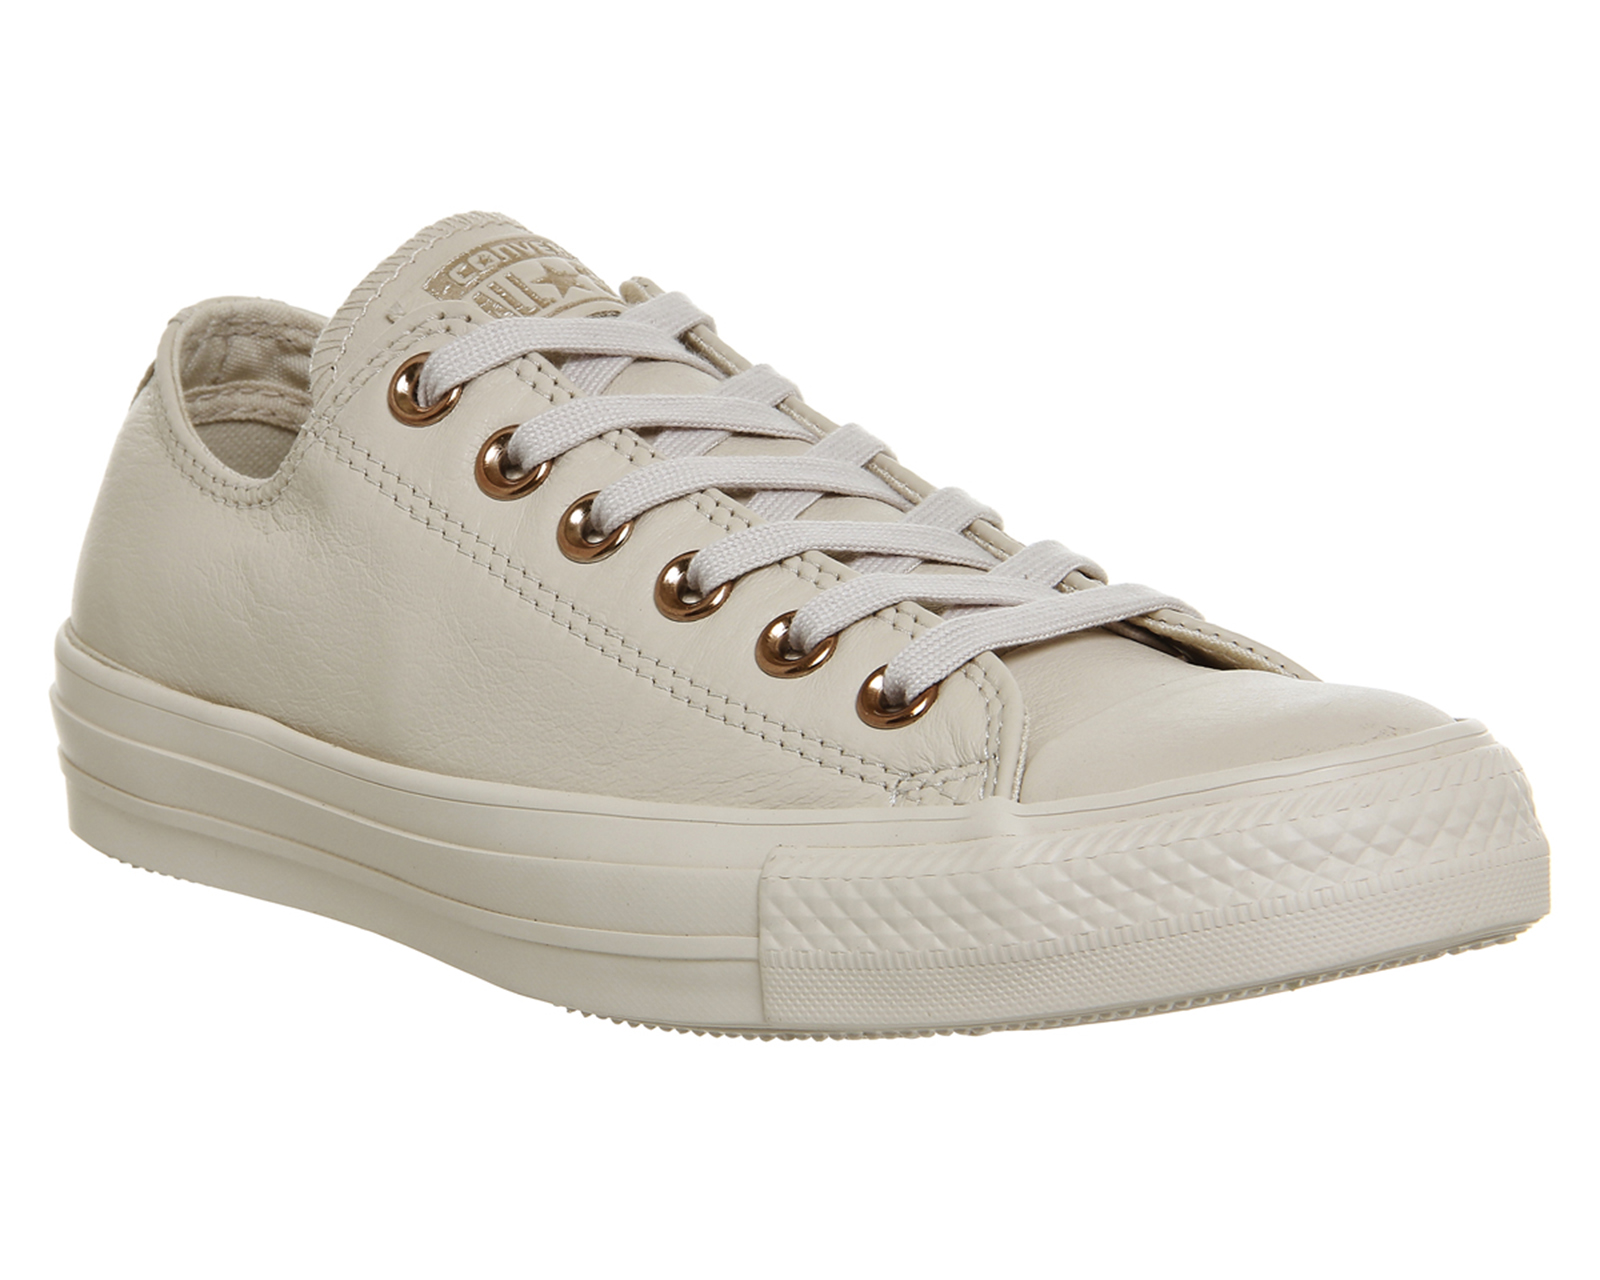 Converse All Star Low Leather Sand Dollar Light Gold Exclusive - Unisex  Sports